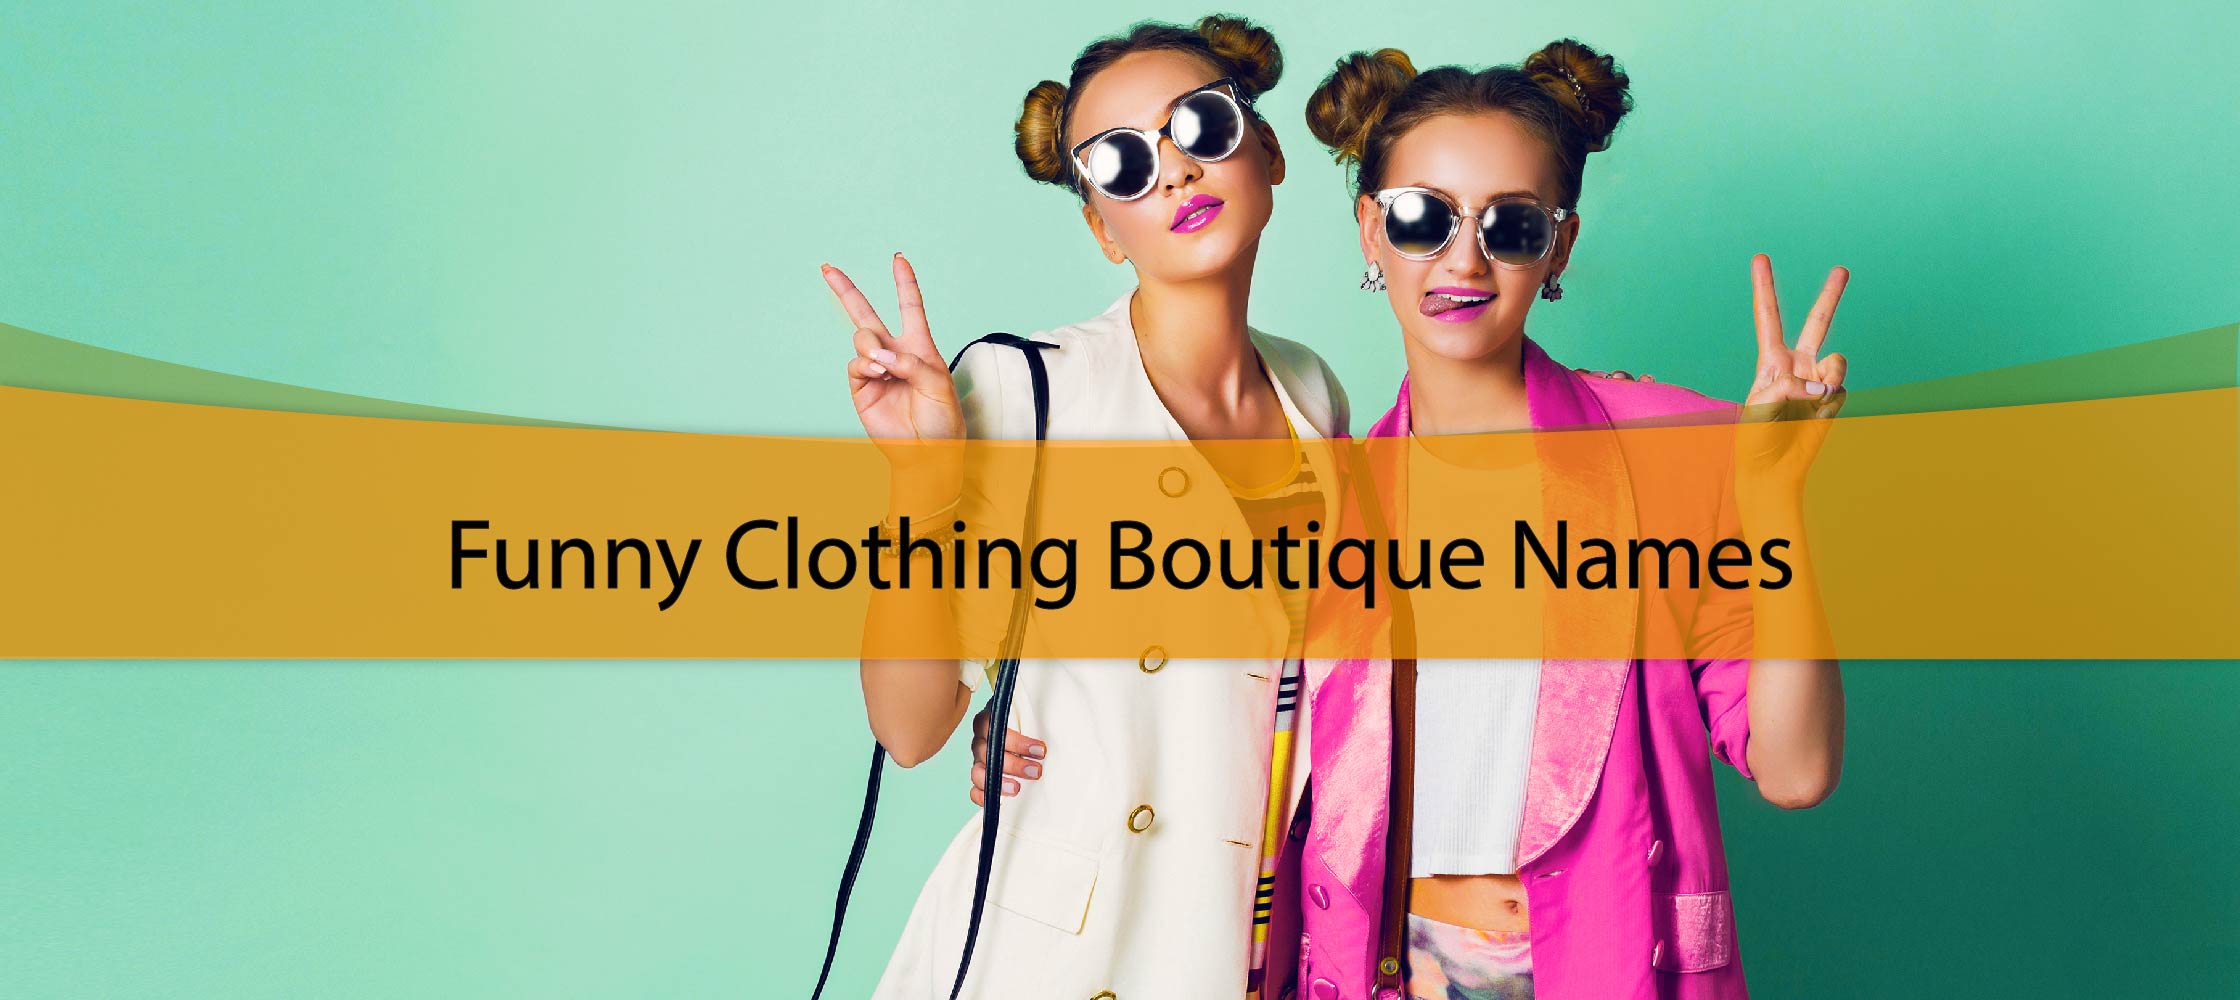 Funny Clothing Boutique Names